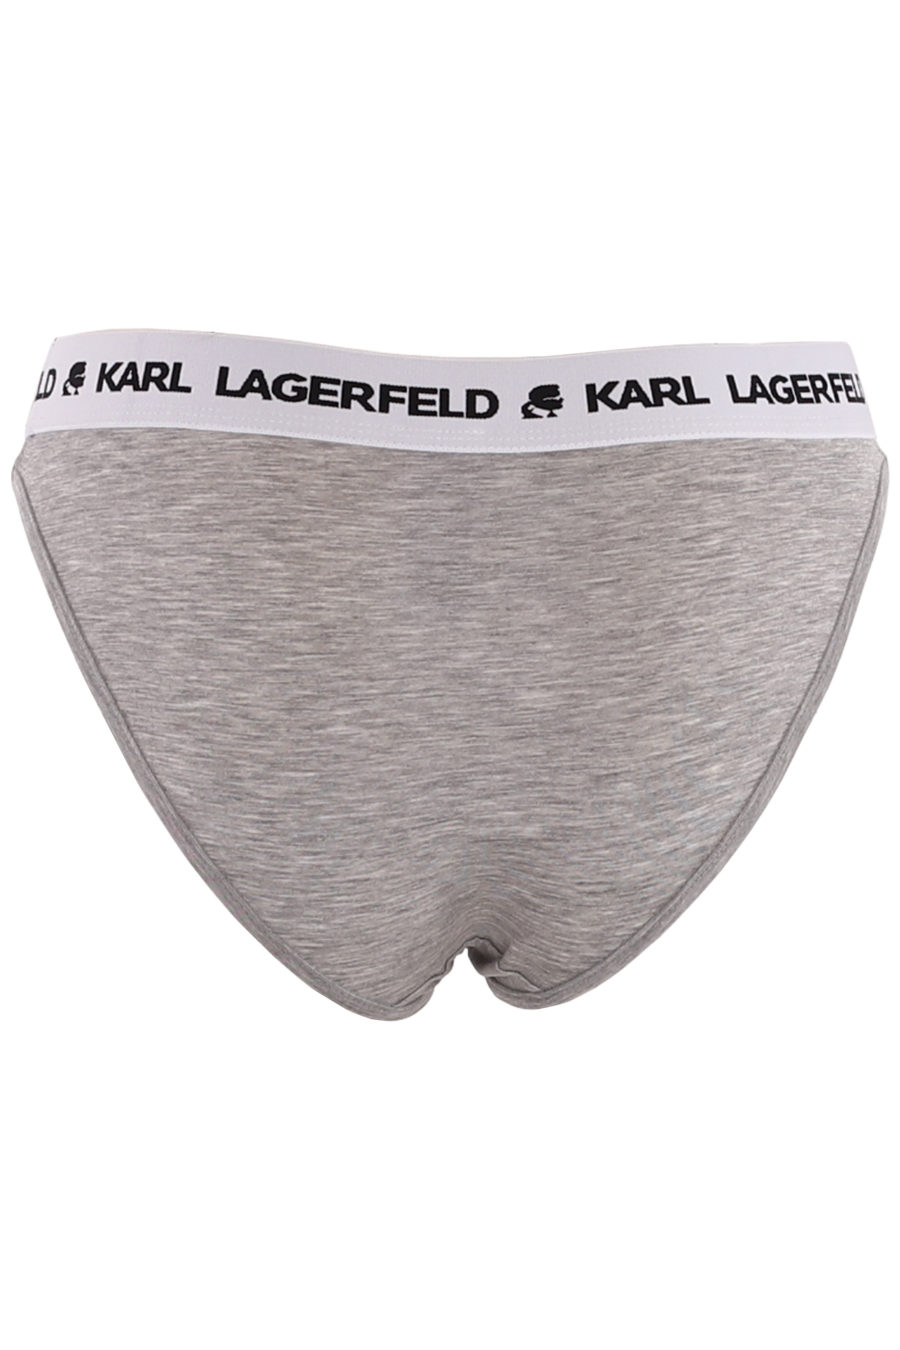 Pack of two grey knickers with logo - 498499dcf4dbef3b358044302bc3eec0cef4f459